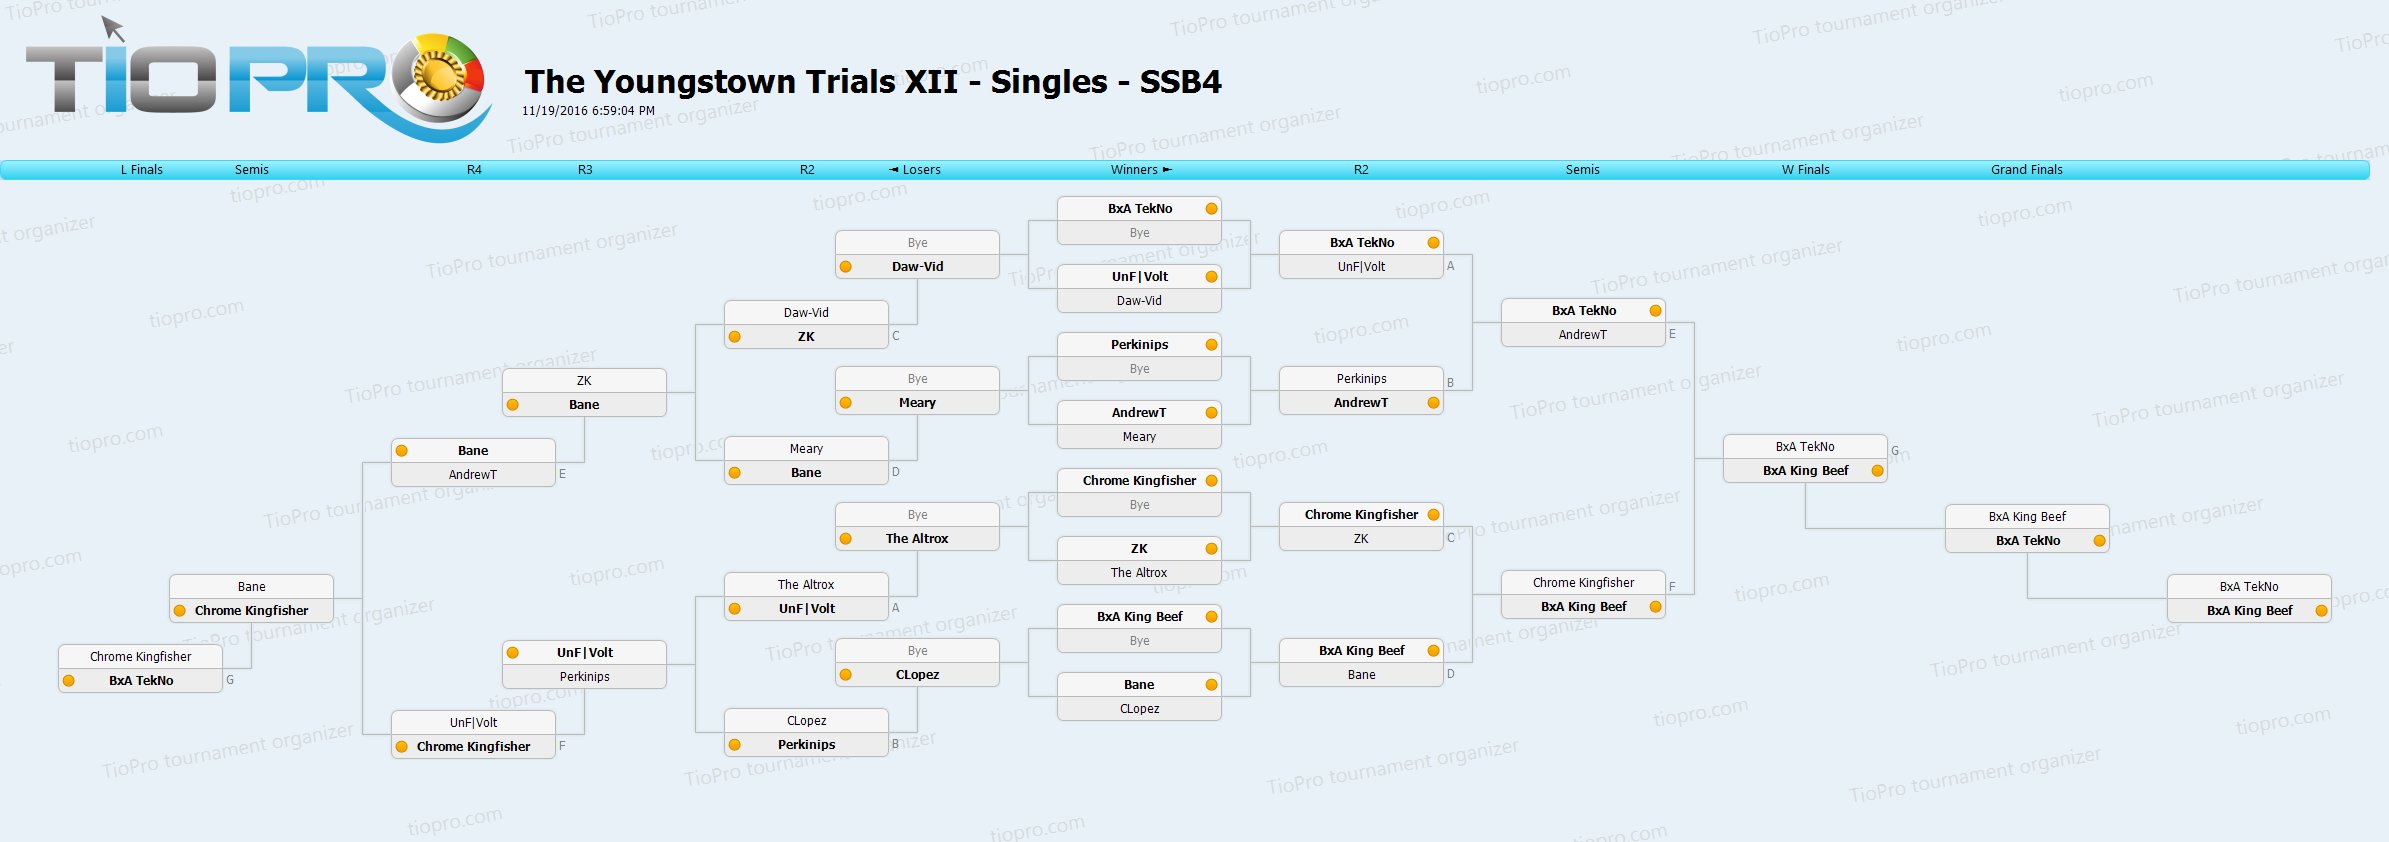 The Youngstown Trials XII - Singles